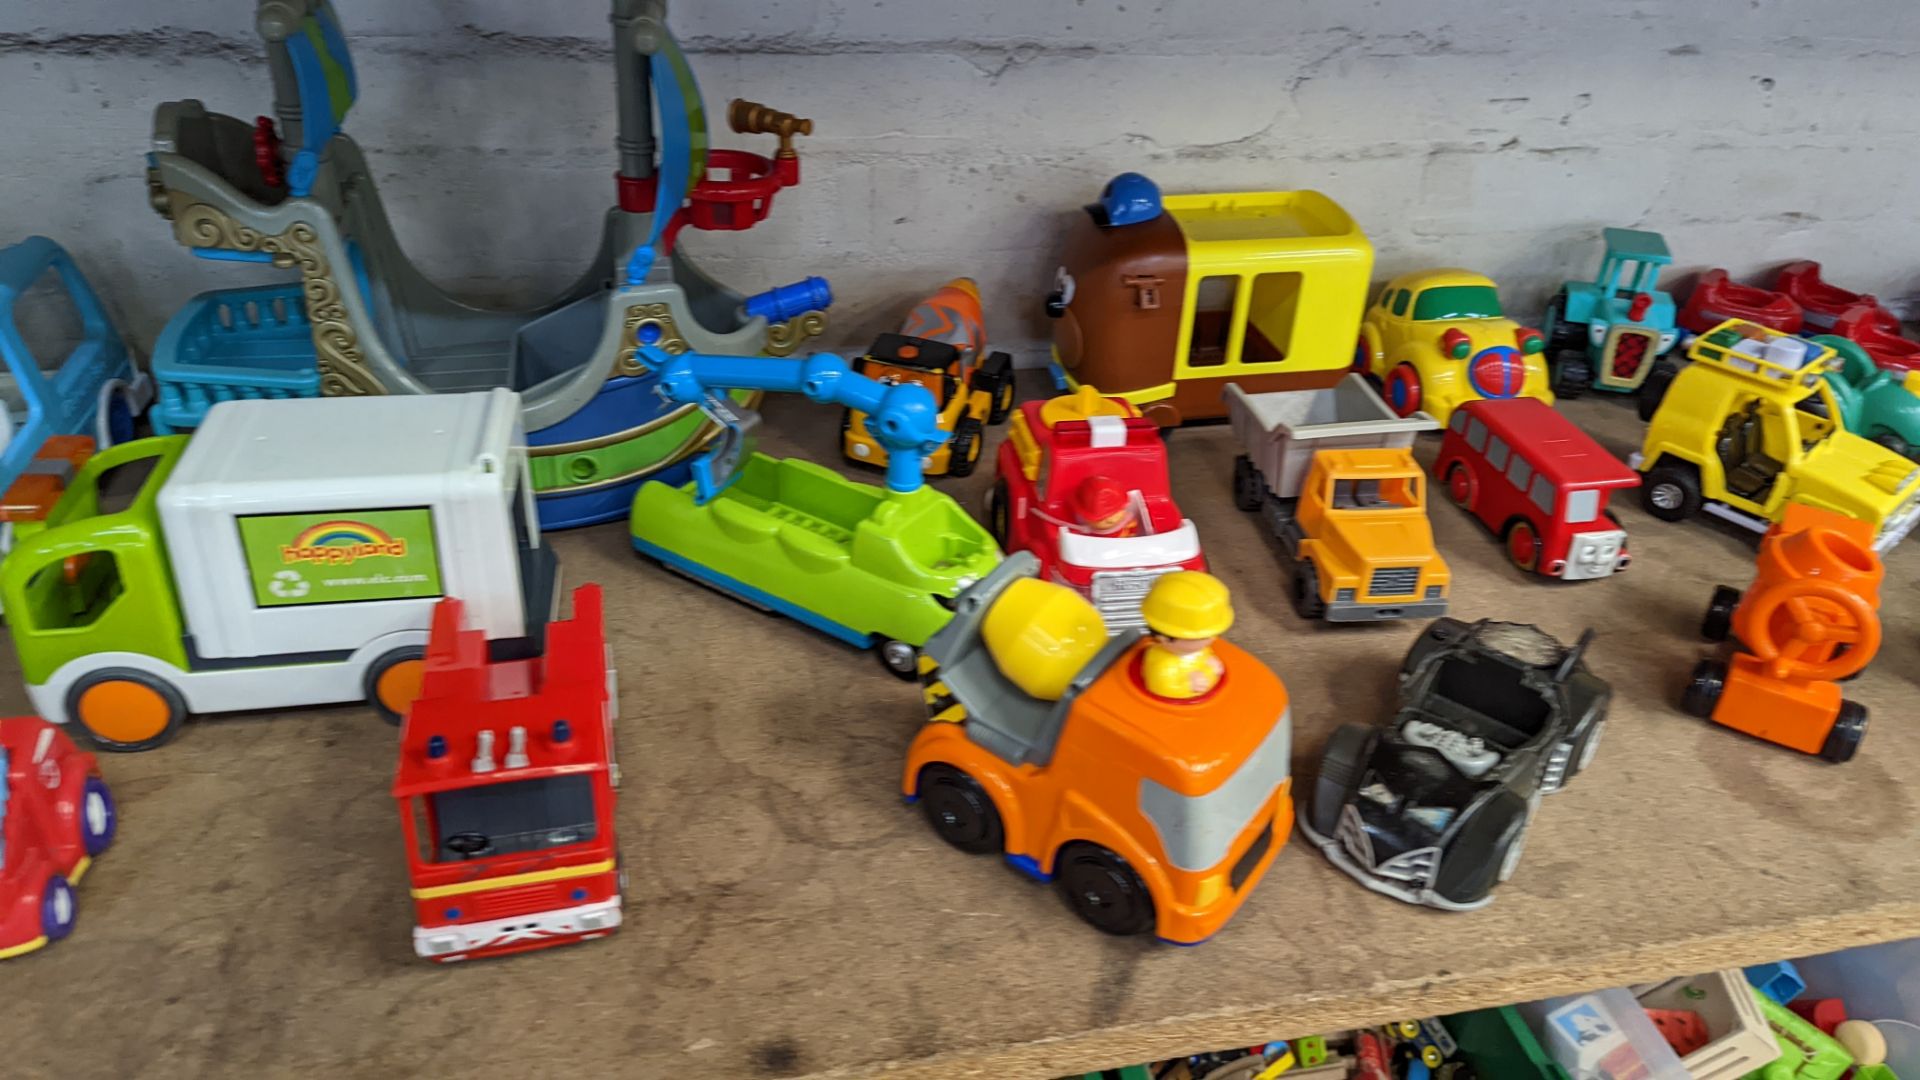 Contents of a bay of assorted children's toys - Image 6 of 10